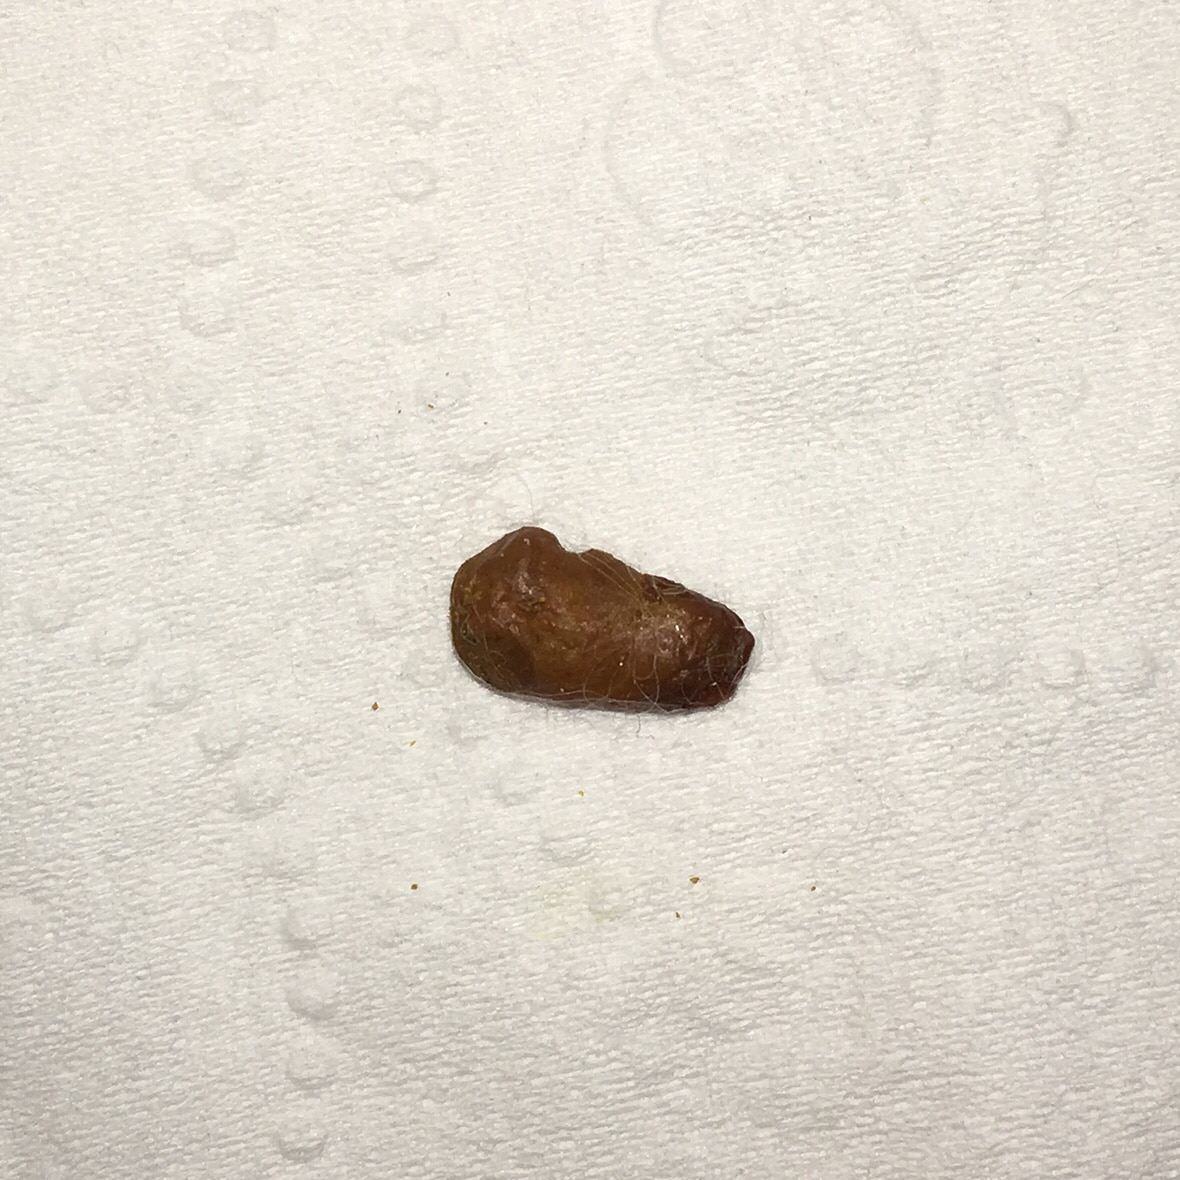 Please Help! Is This A Cat Hairball?